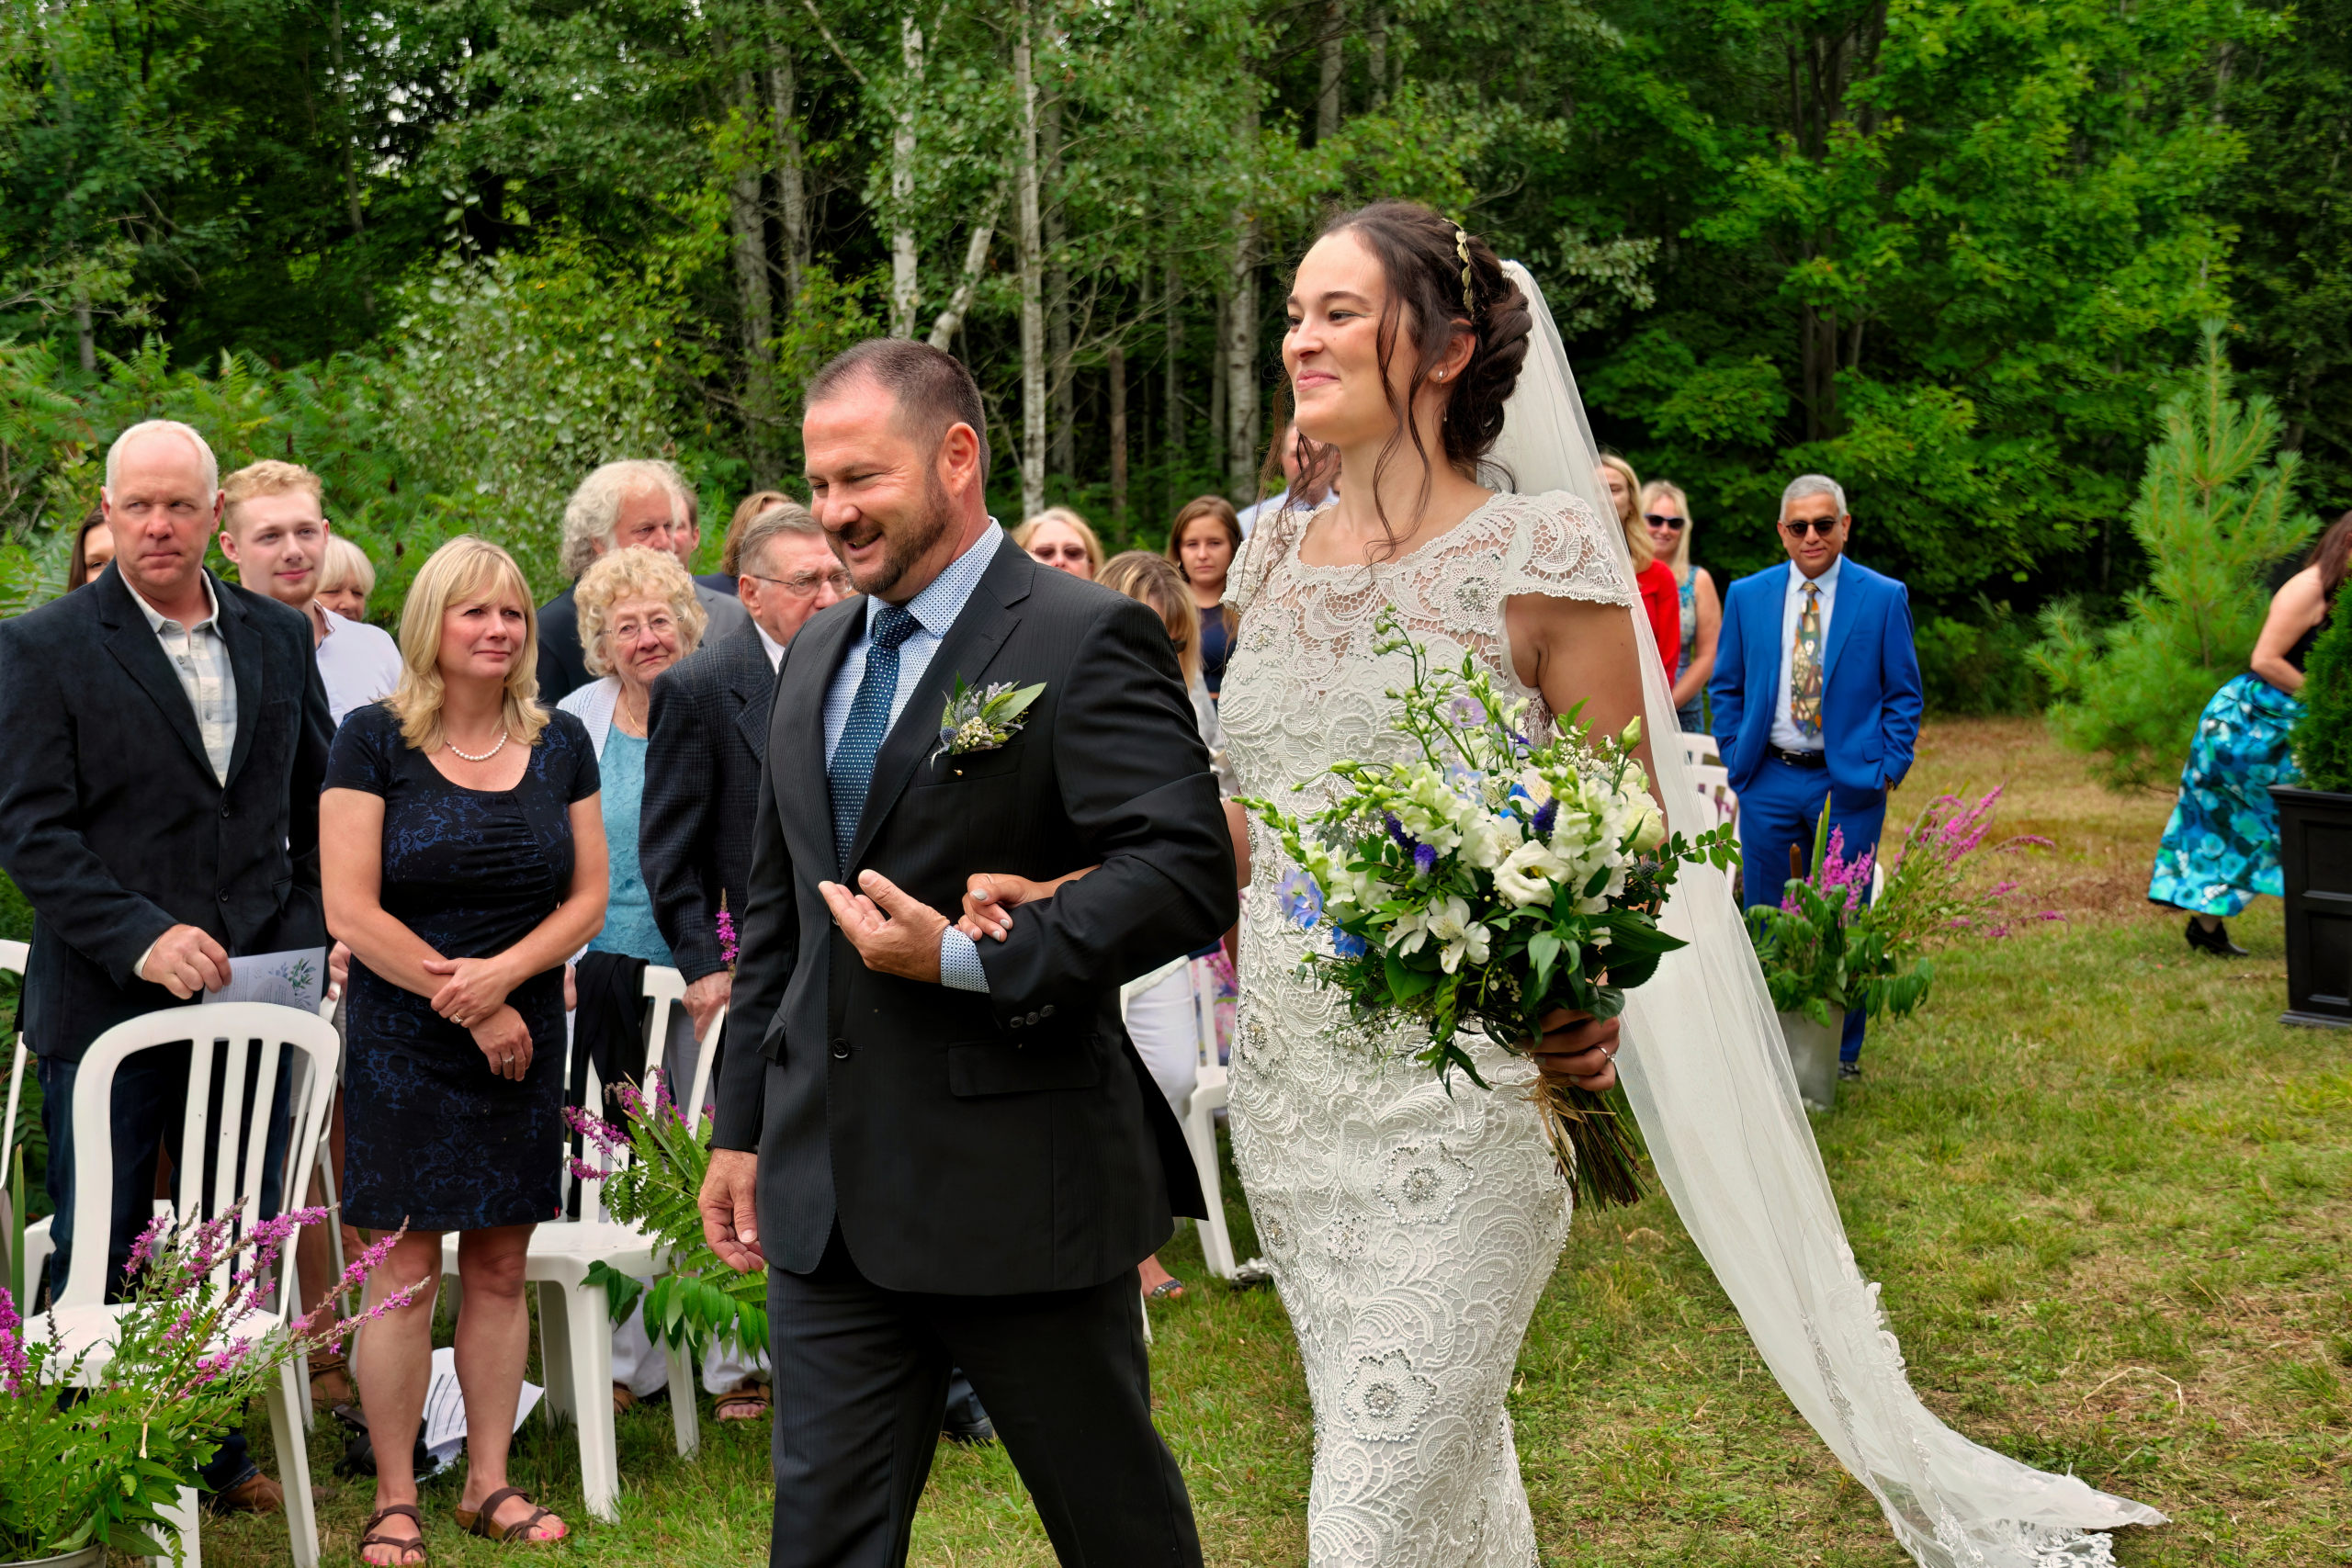 Bride Walking down Aisle with Her Father at Outdoor Wedding